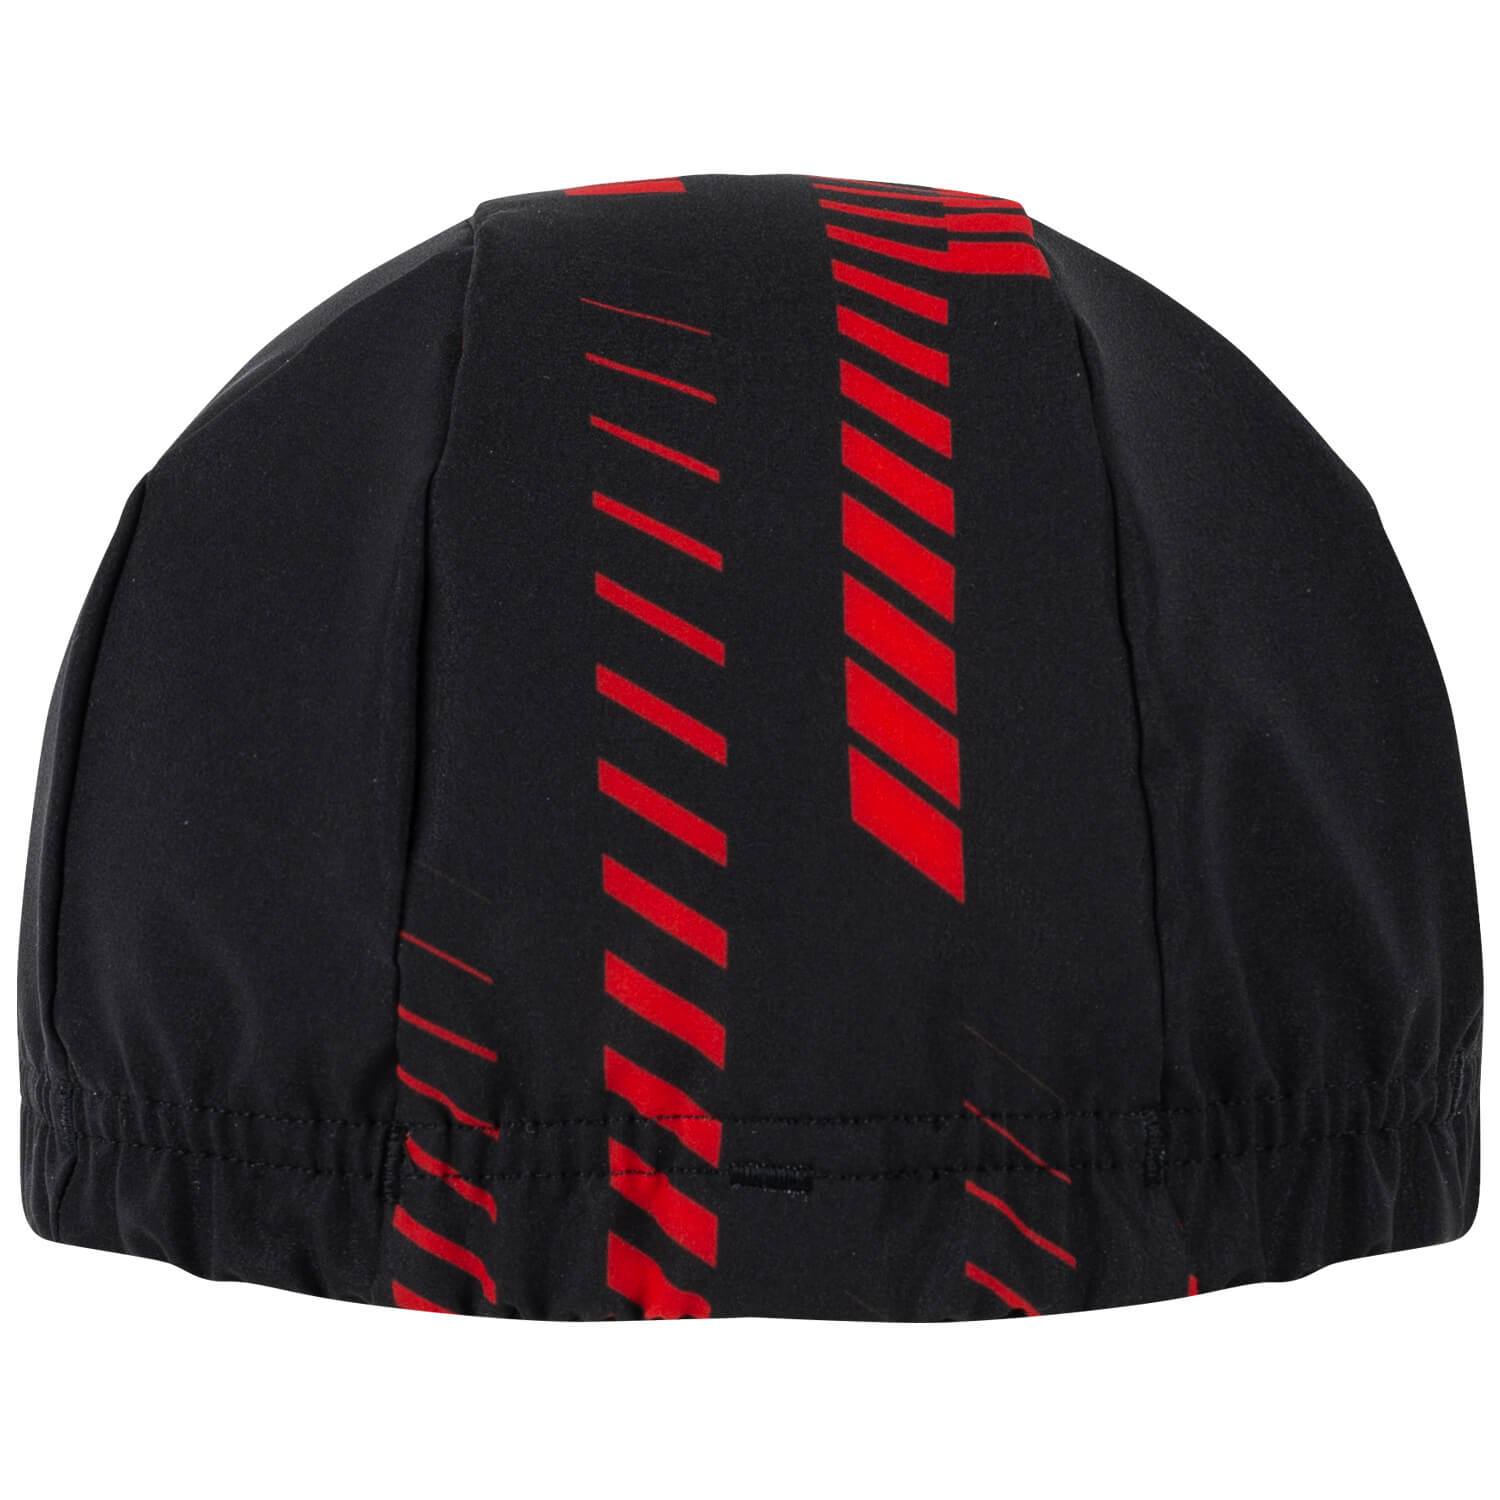 Bild 4: Cycling Cap Red Style 